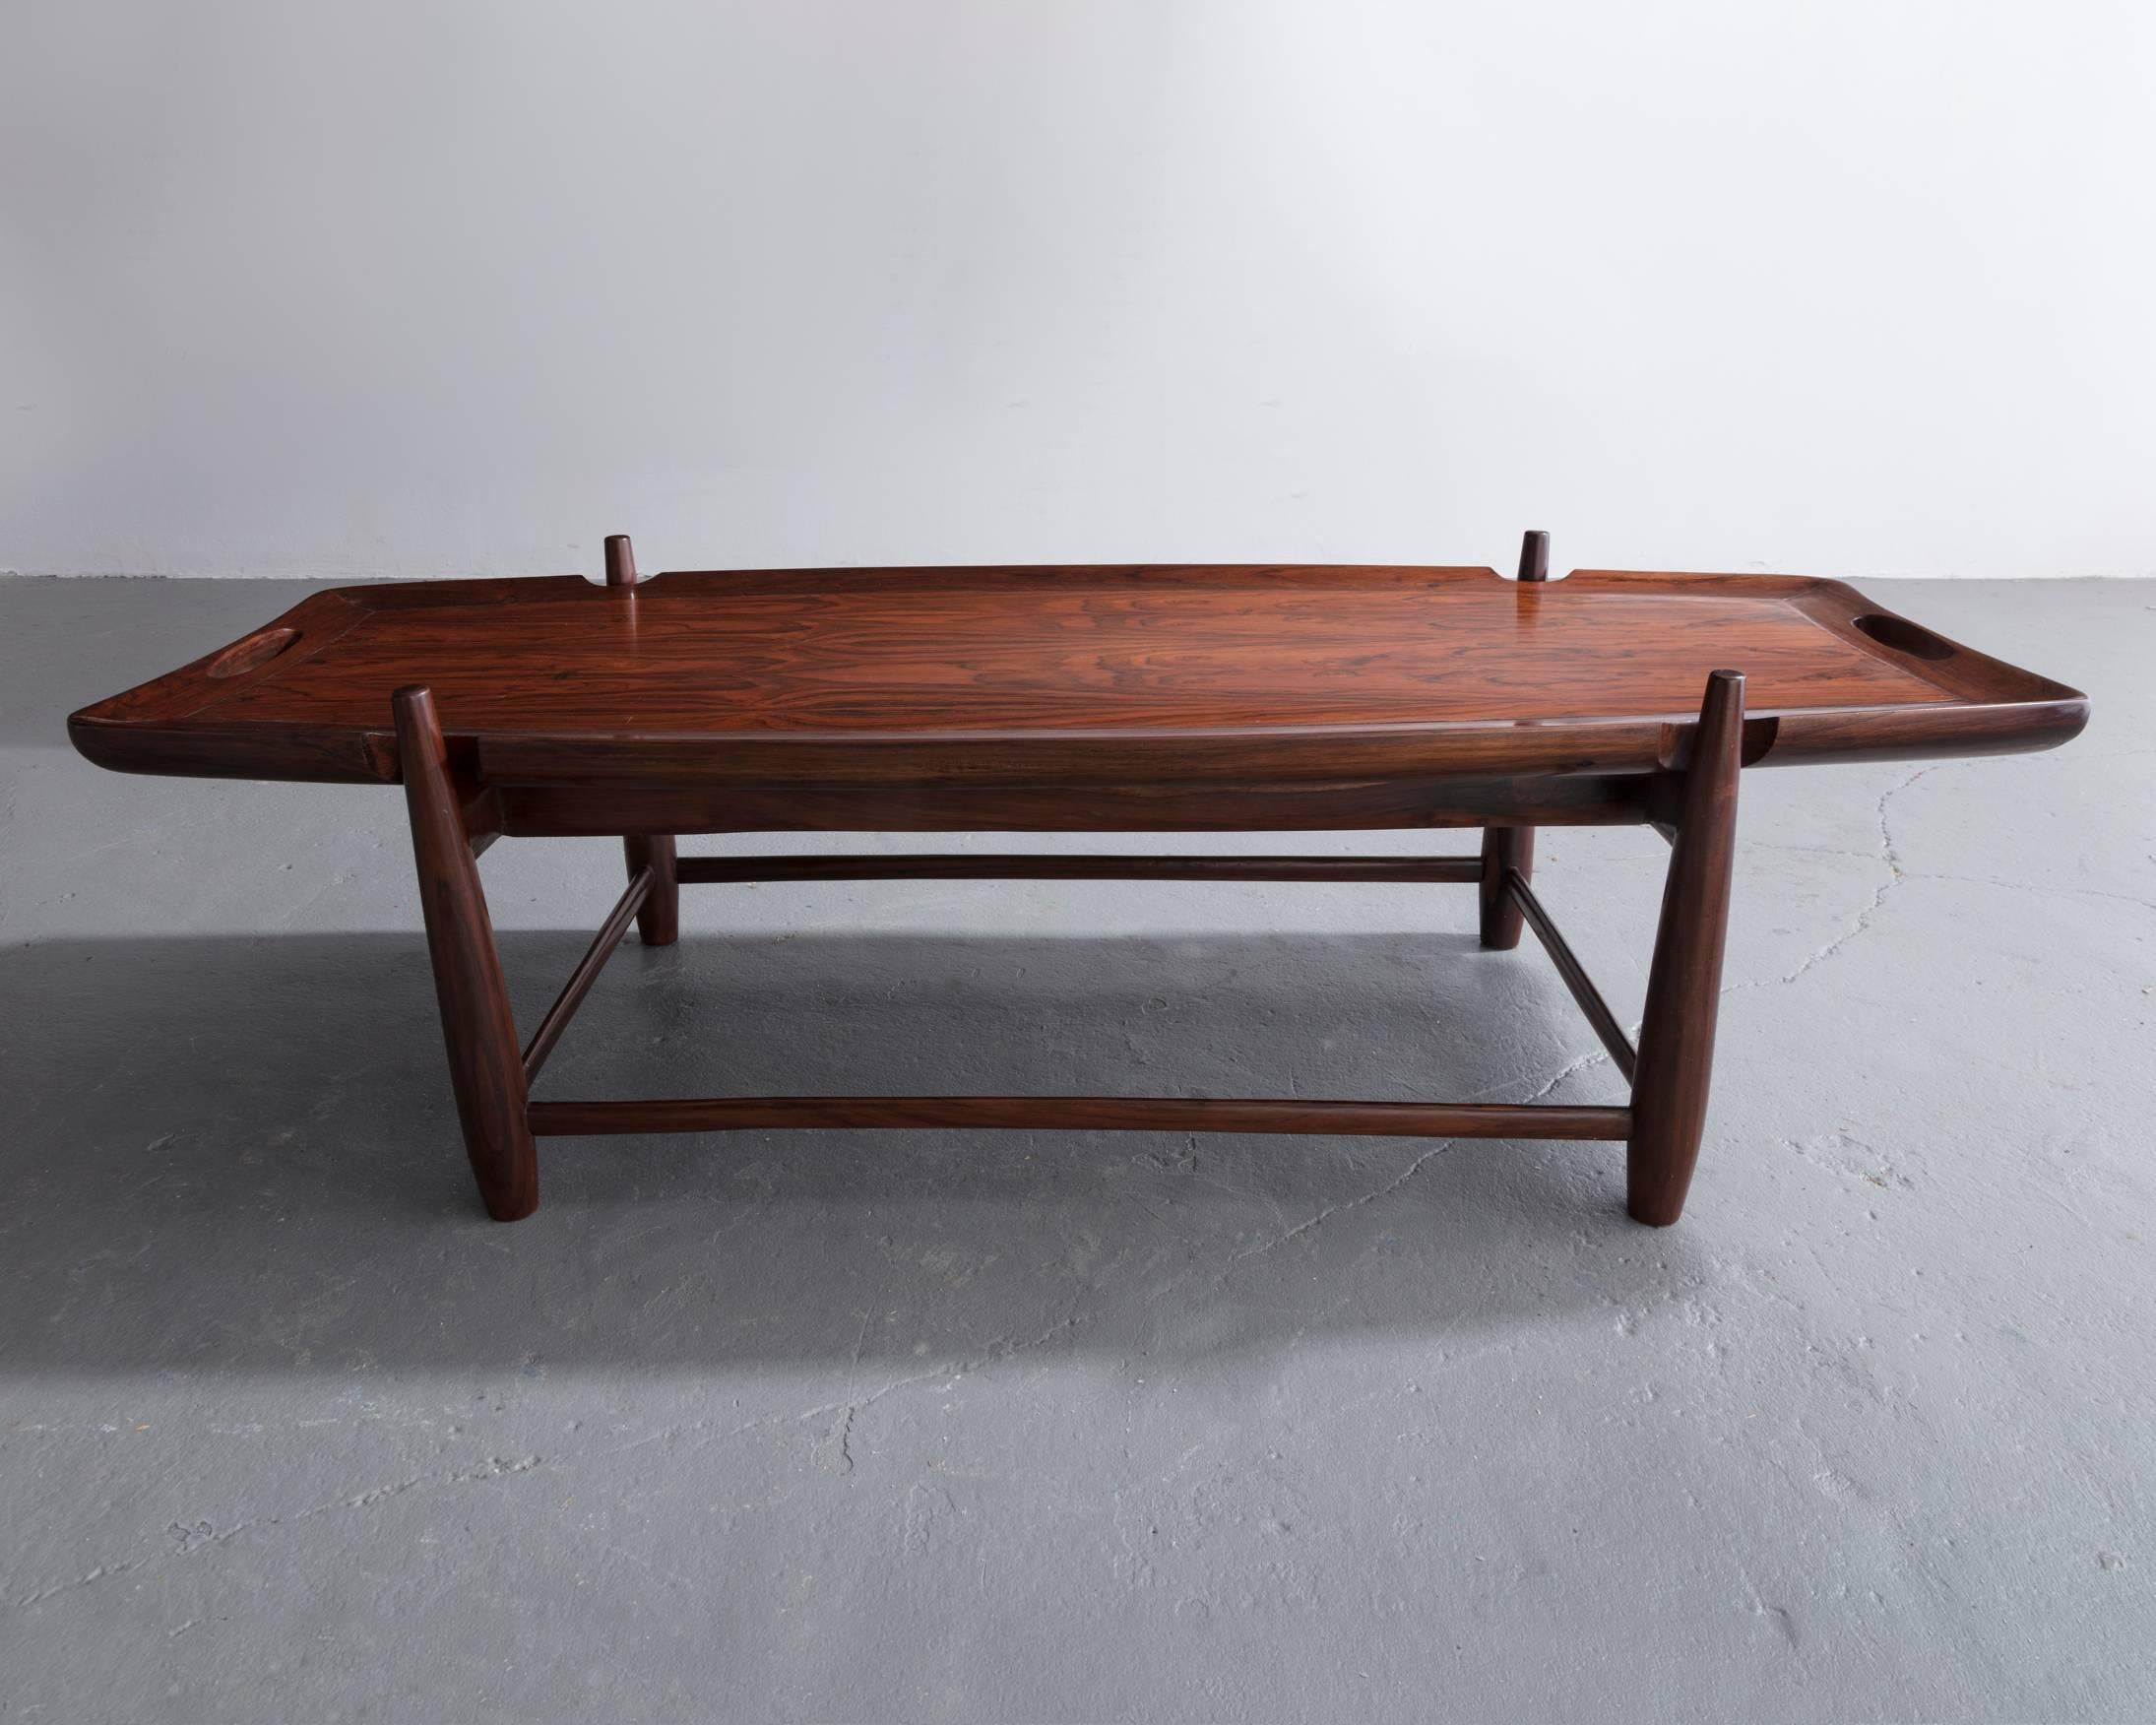 Mid-20th Century Arimello Coffee Table with Handles Designed by Sergio Rodrigues, Brazil, 1958